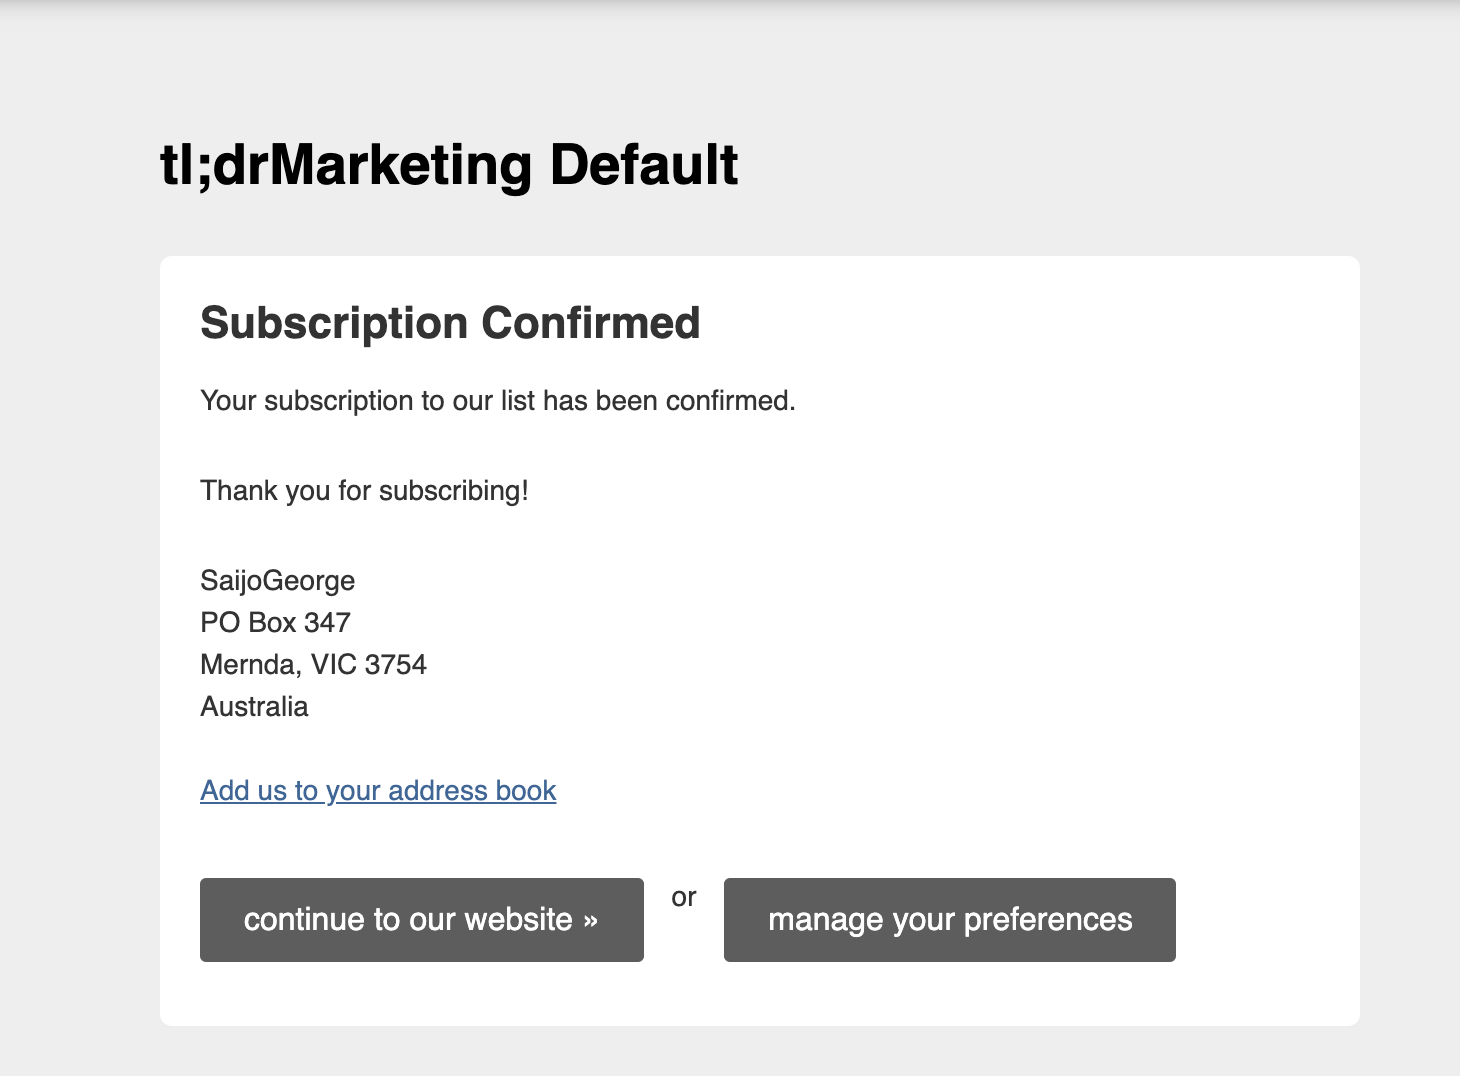 Subscriber confirmation email